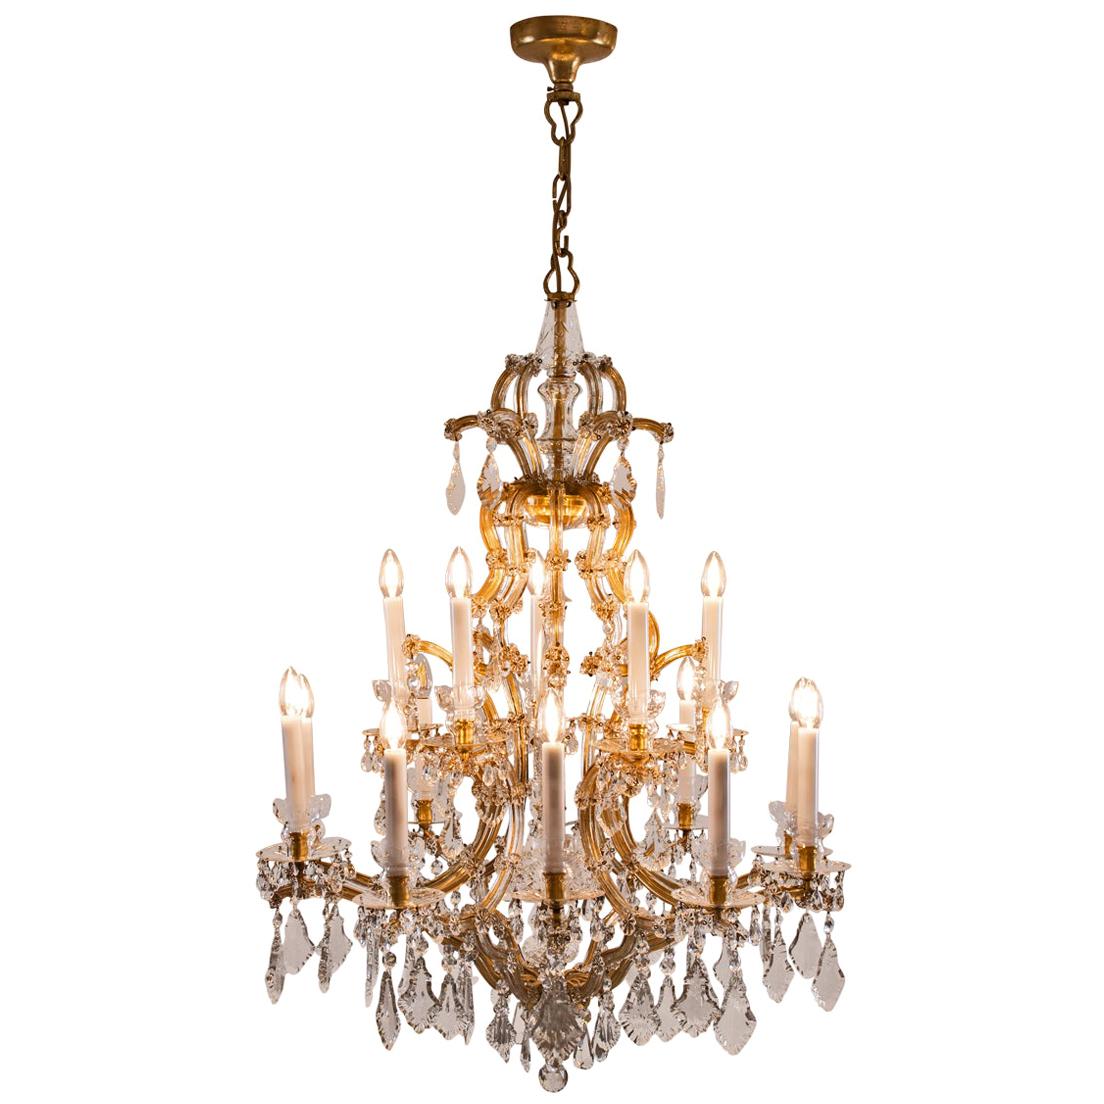 Large Original Magnificent Lobmeyr/Zahn Chandelier Maria Theresia Style, 1920s